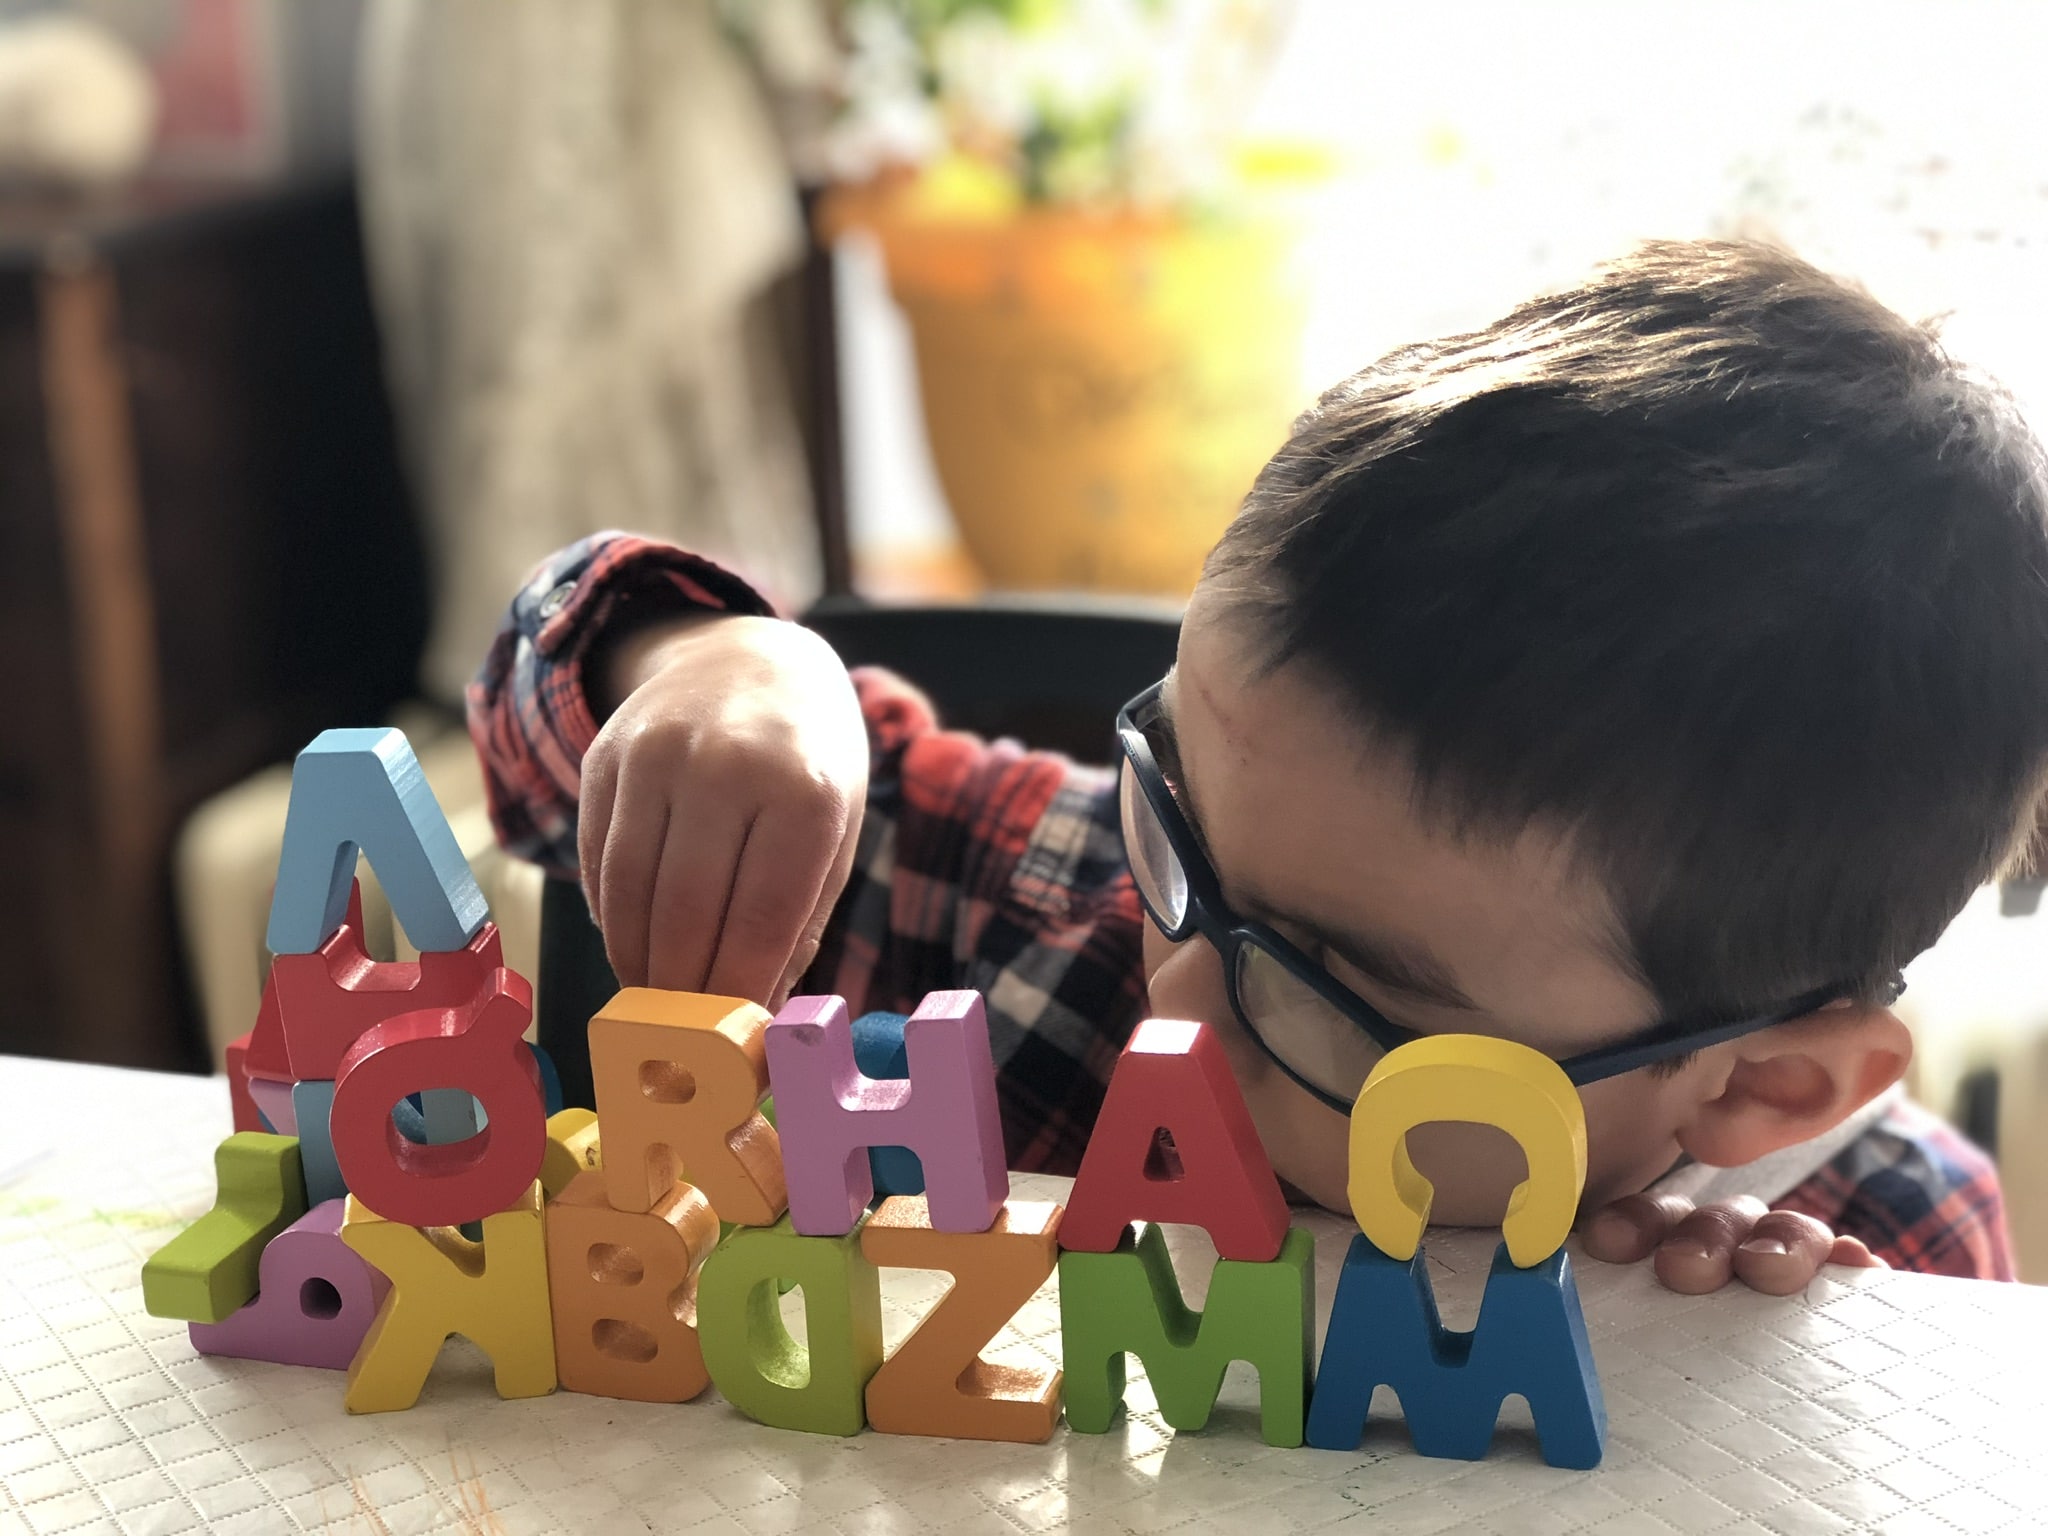 Little boy playing with alphabet puzzles is an encouragement for homeschool moms that it's about the process, not perfection.